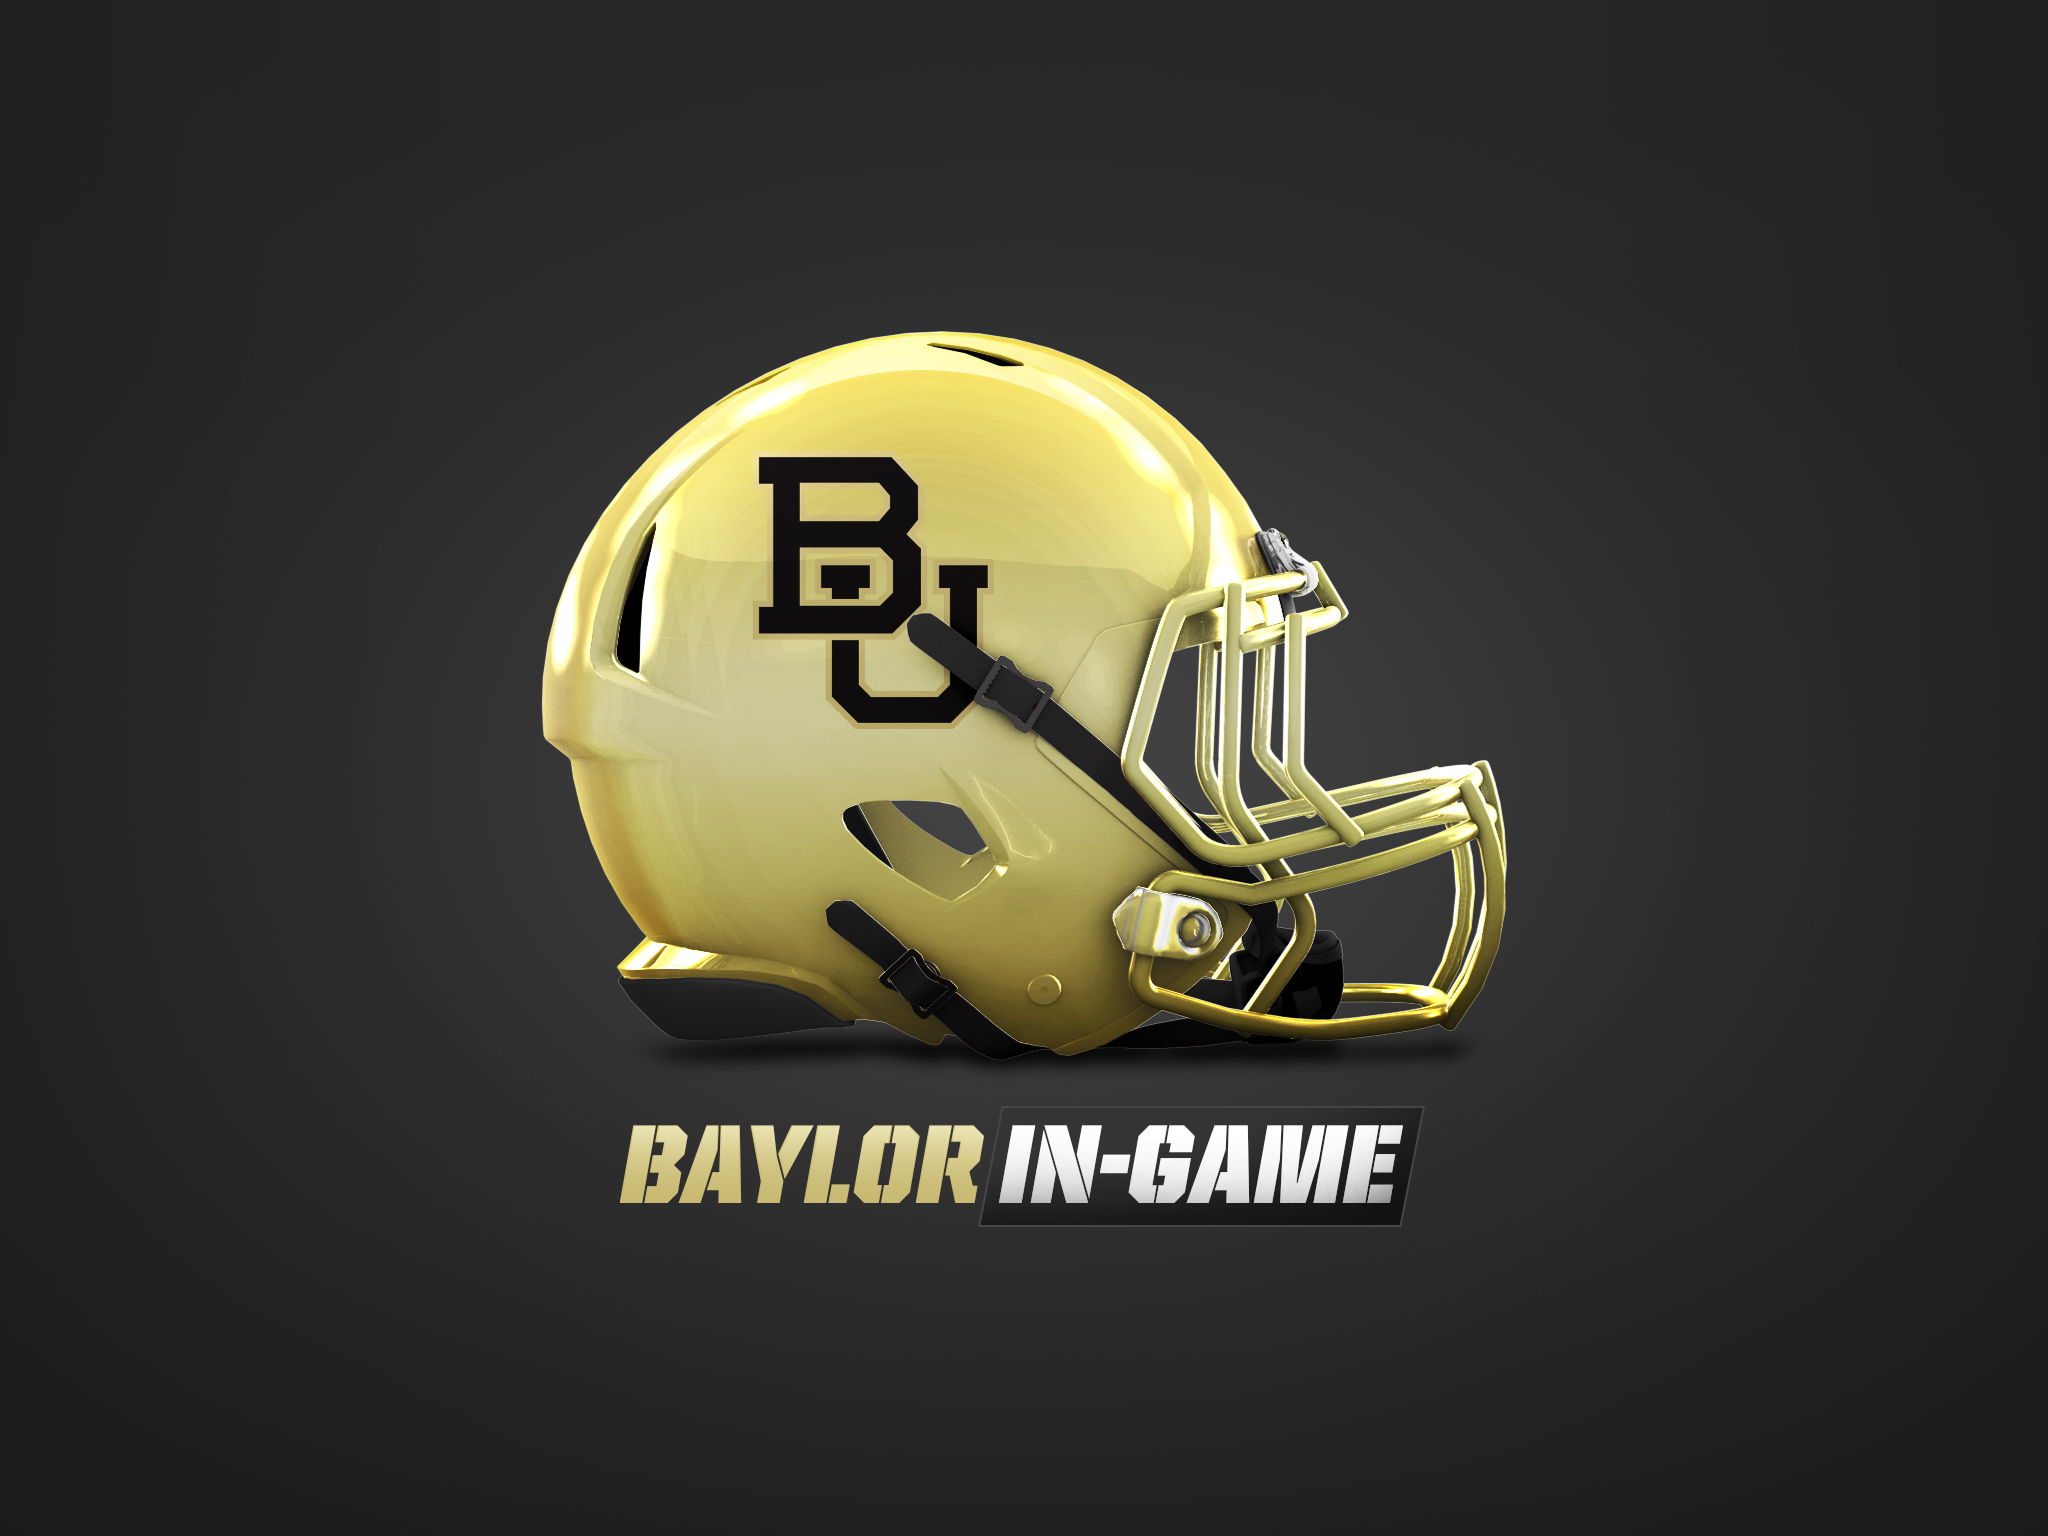 Baylor University's McLane Stadium Features Extreme Networks Wi Fi And Baylor In Game App By YinzCam To Boost Fan Experience. Media And Public Relations